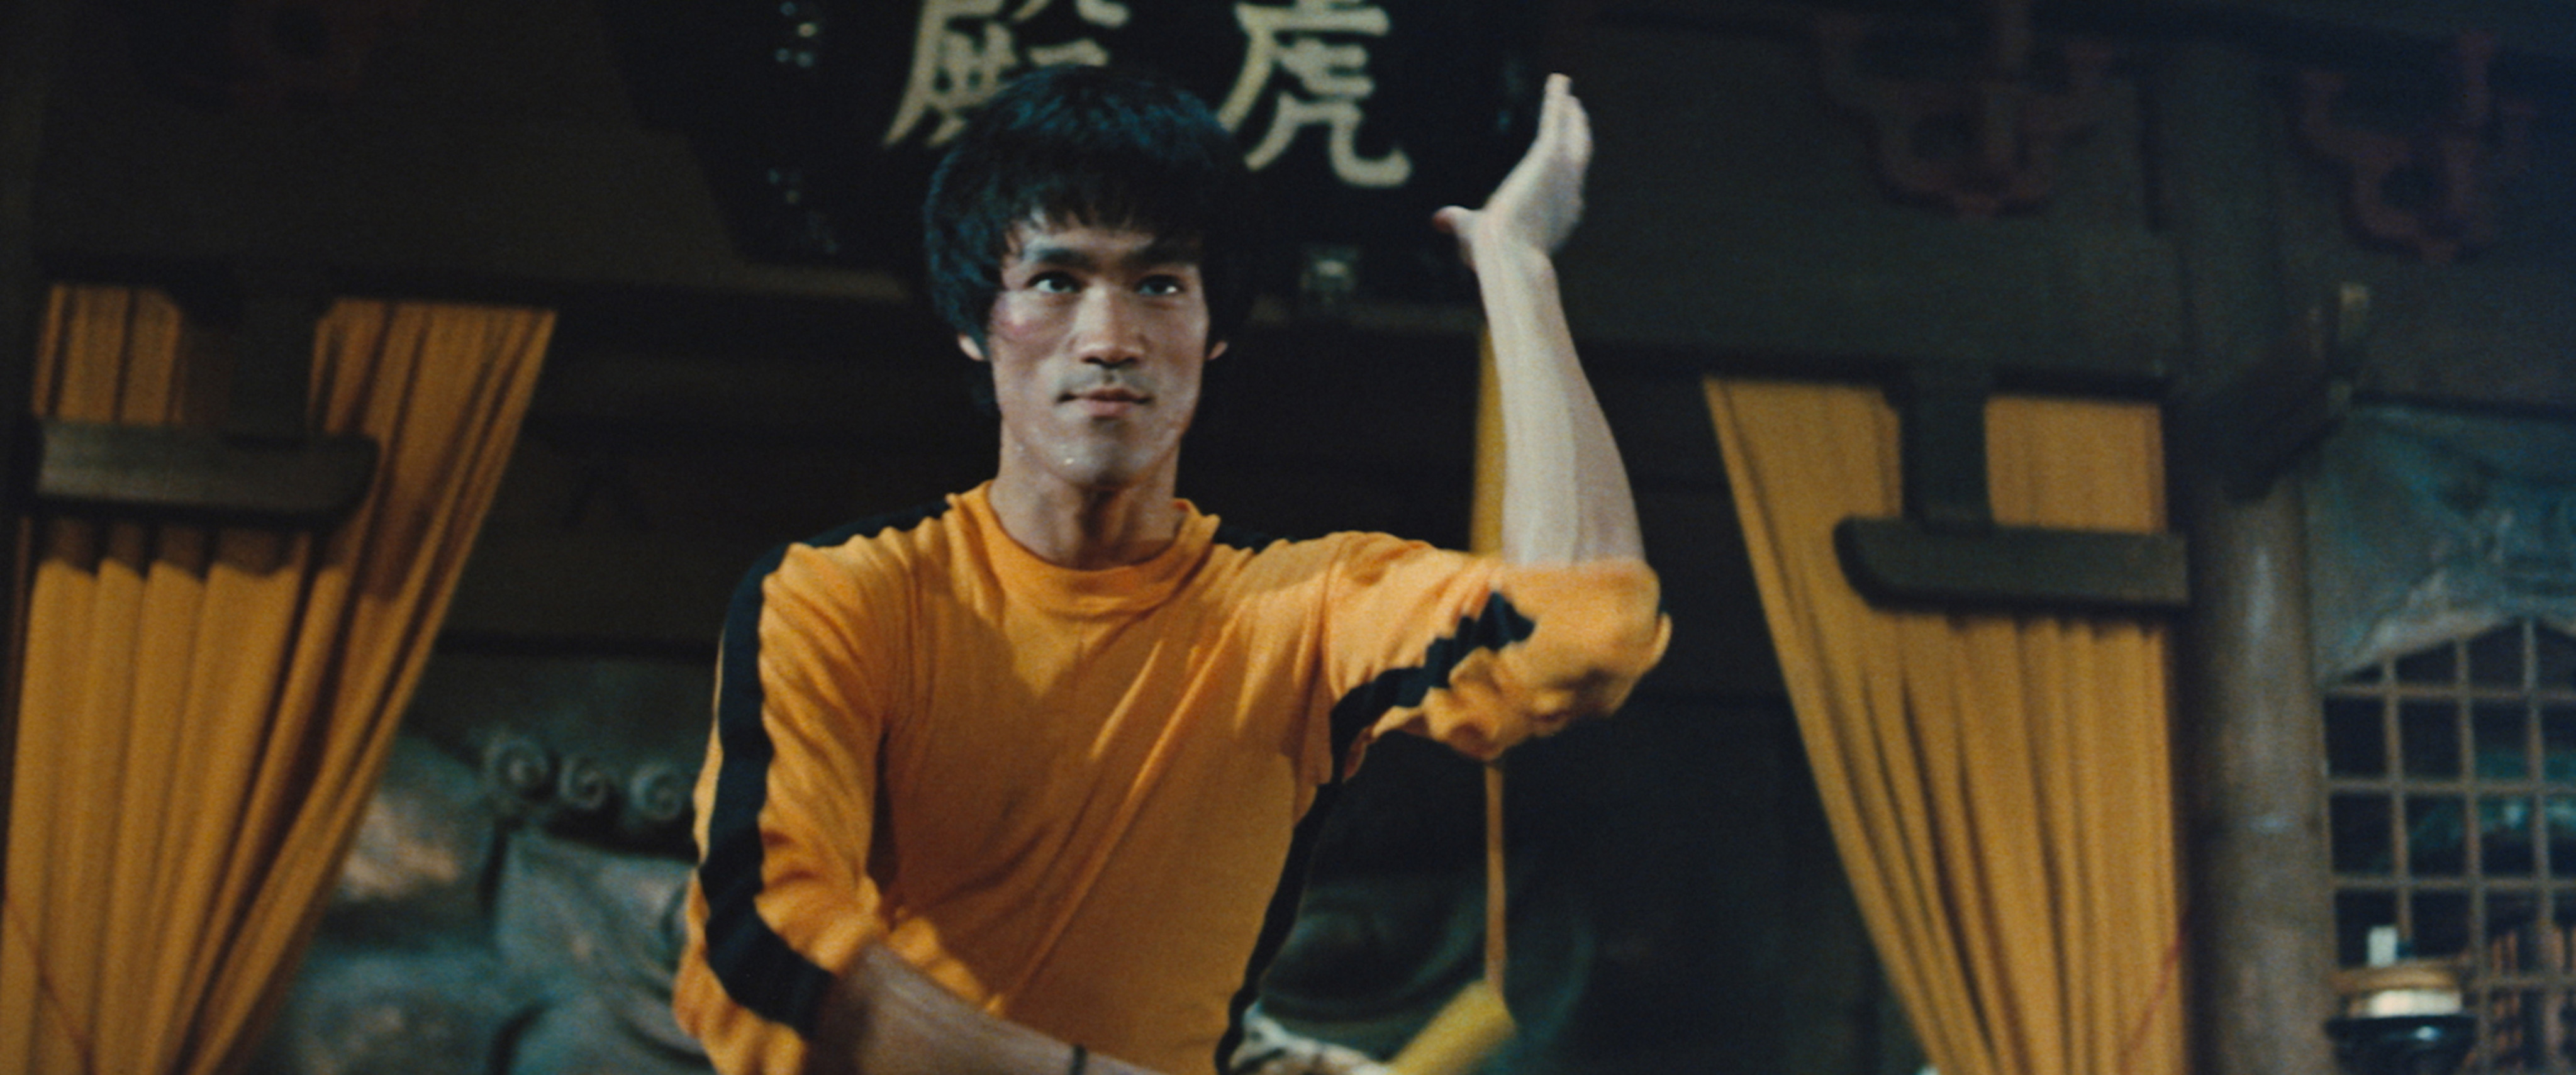 Happy birthday Bruce Lee: 7 things about the martial arts icon you may not know, from his love of samurai films to wanting more comic scenes